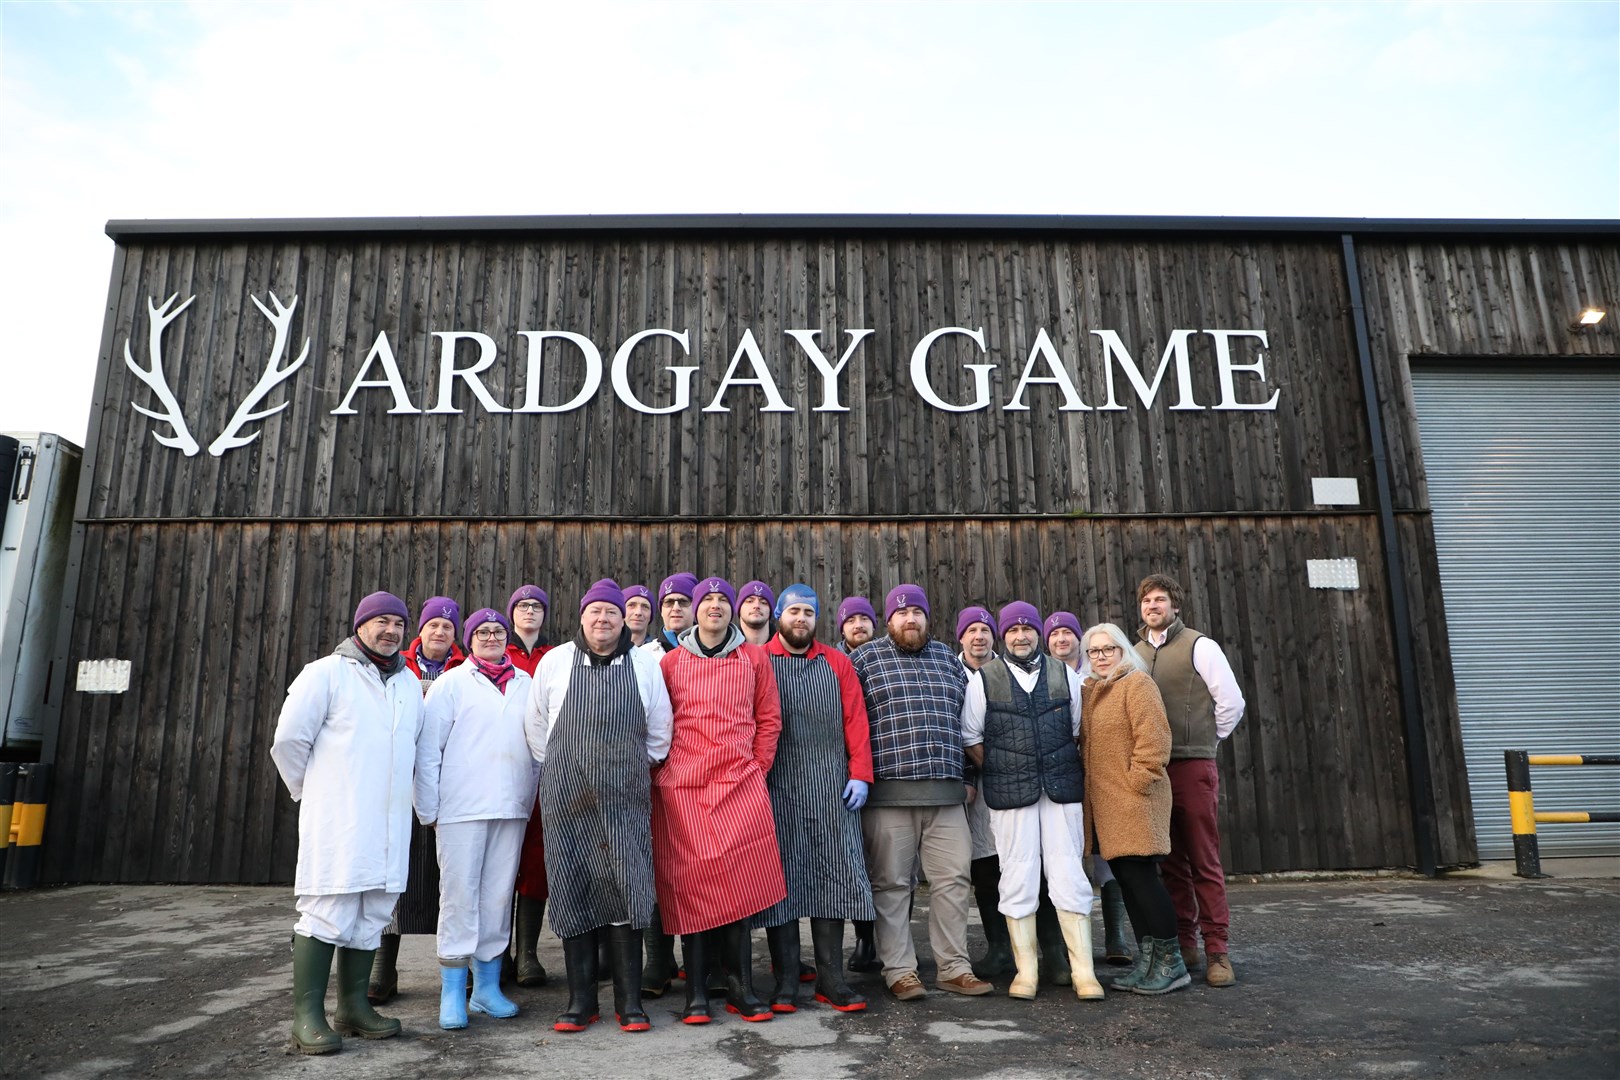 Ardgay Game is among the finalists for the BBC Food and Farming Awards.